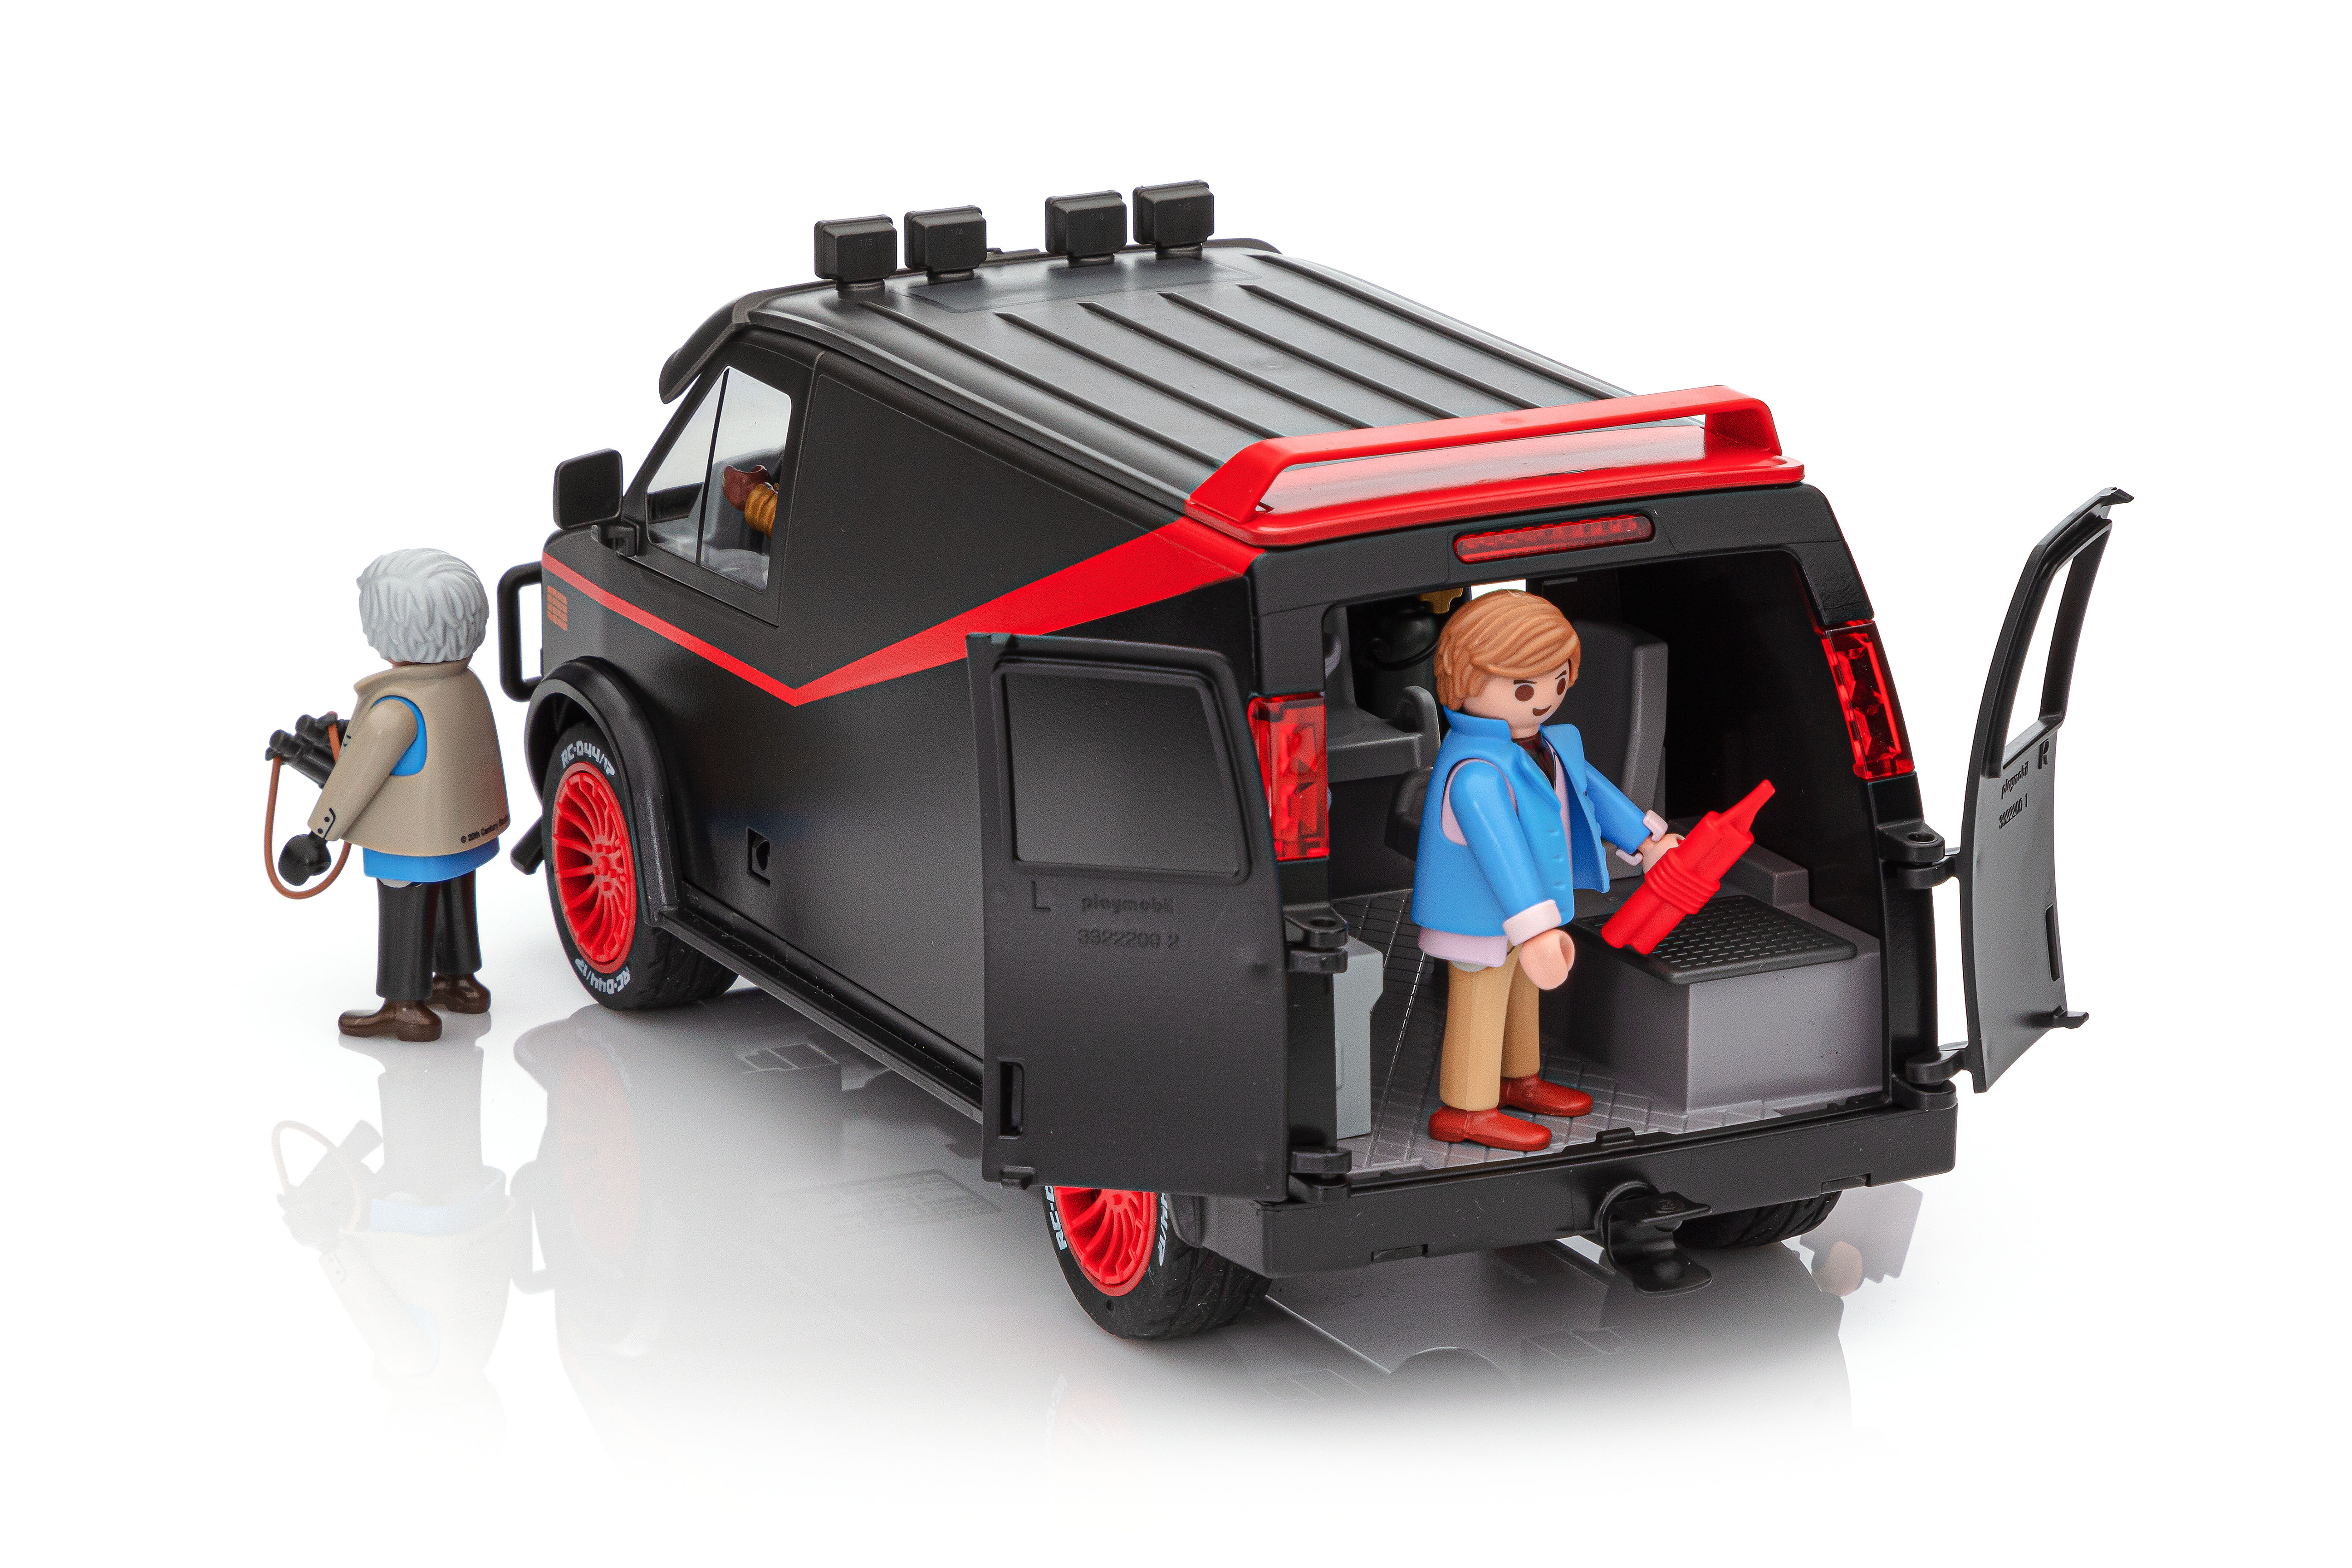 VEHICULE PLAYMOBIL A Team Neuf Agence Tous Risques. EUR 30,00 - PicClick FR